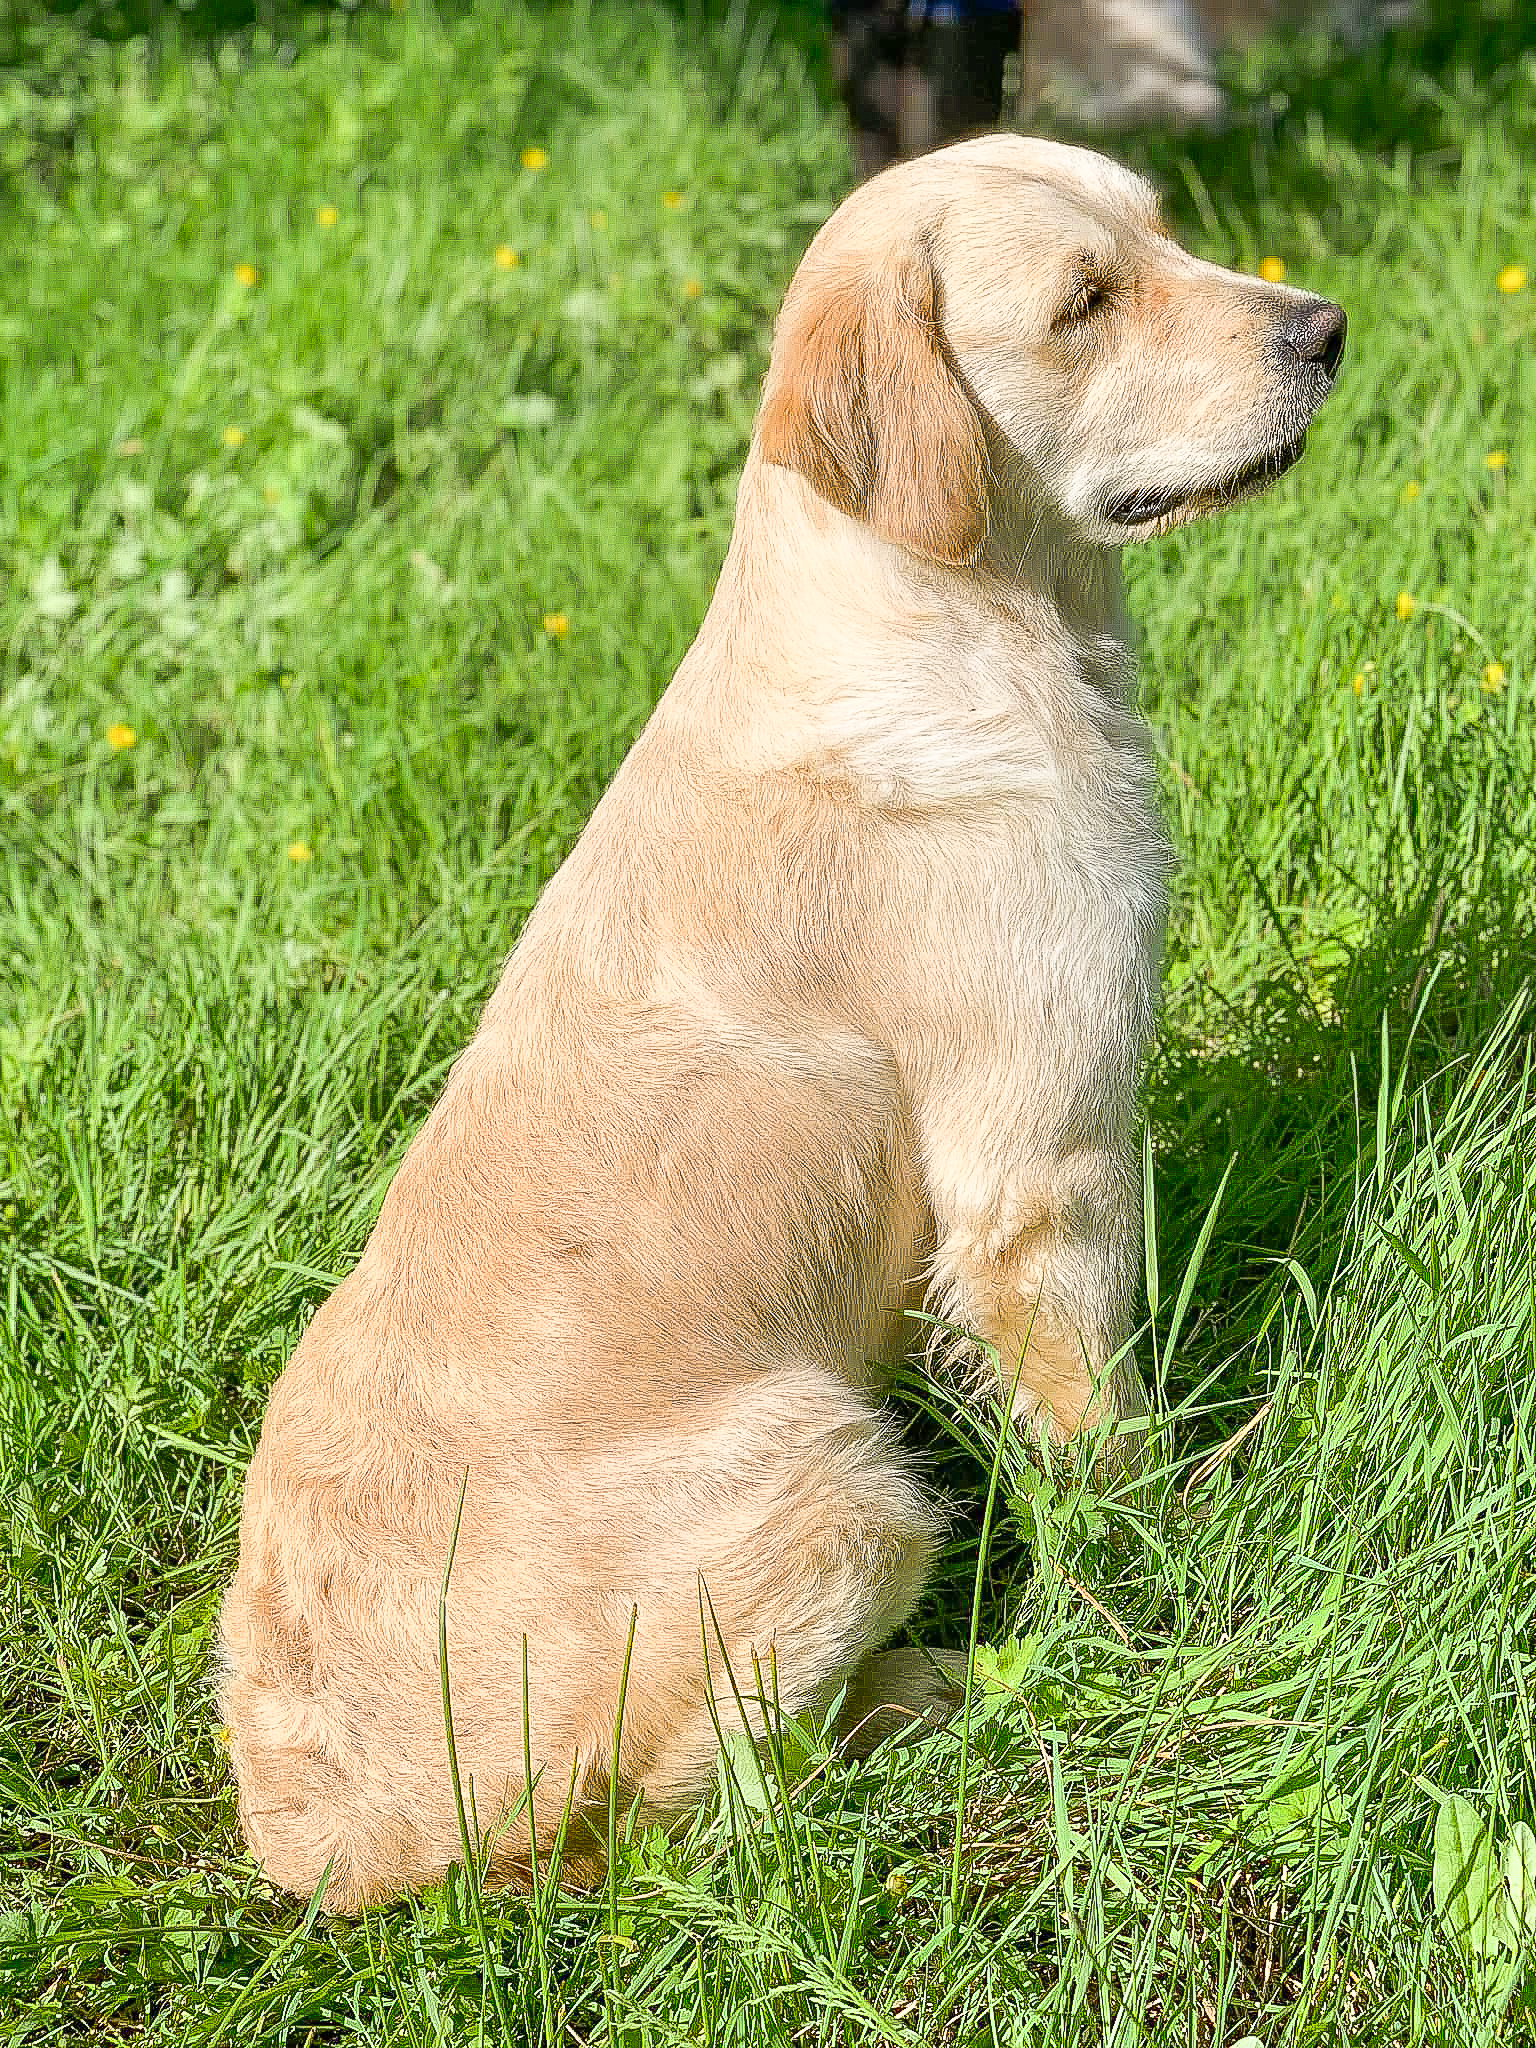 Forestry elevage familial golden retrievers retriever chien river normandie manche canisy-23